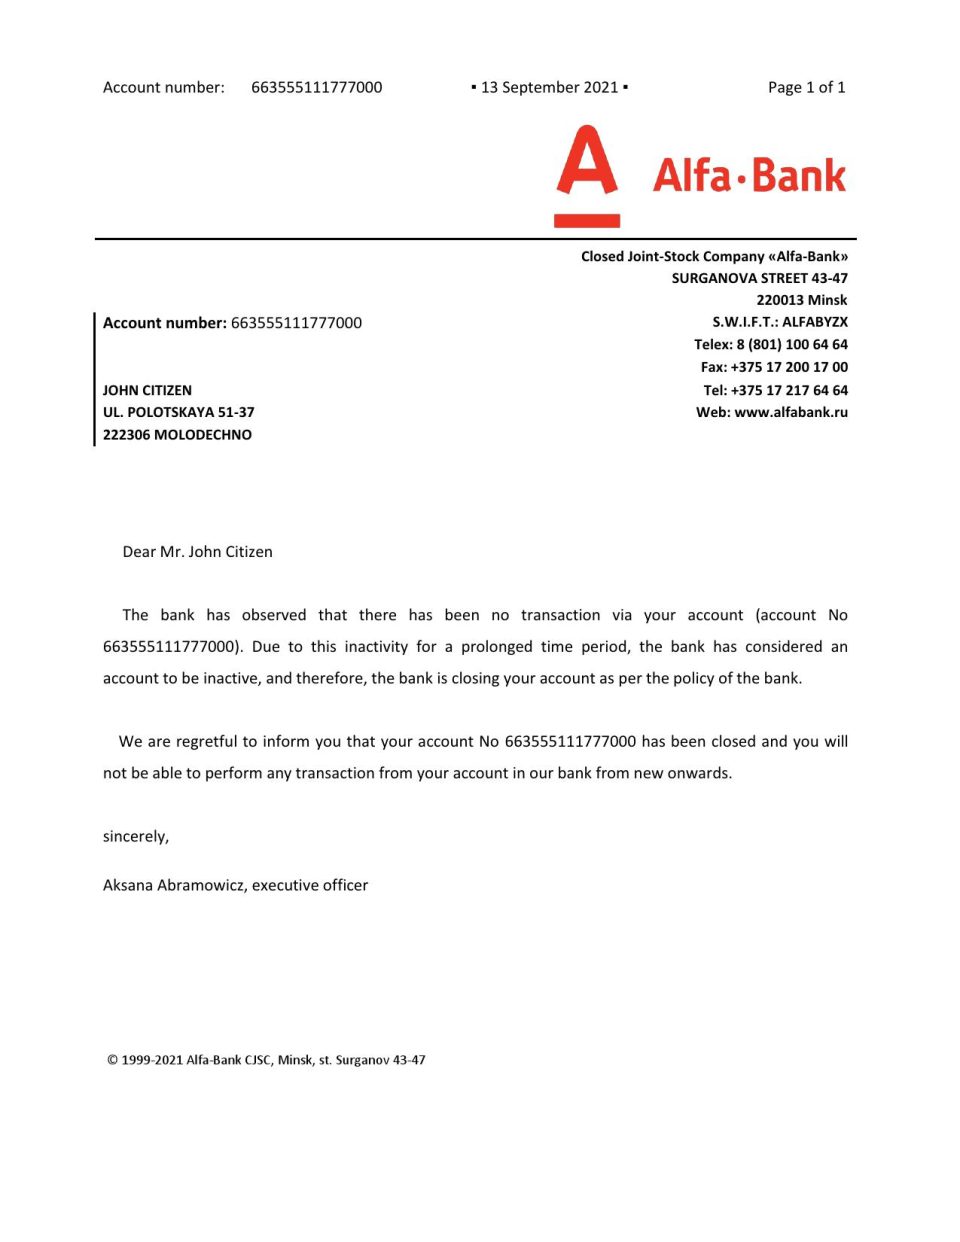 Belarus Alfa bank account closure reference letter template in Word and PDF format